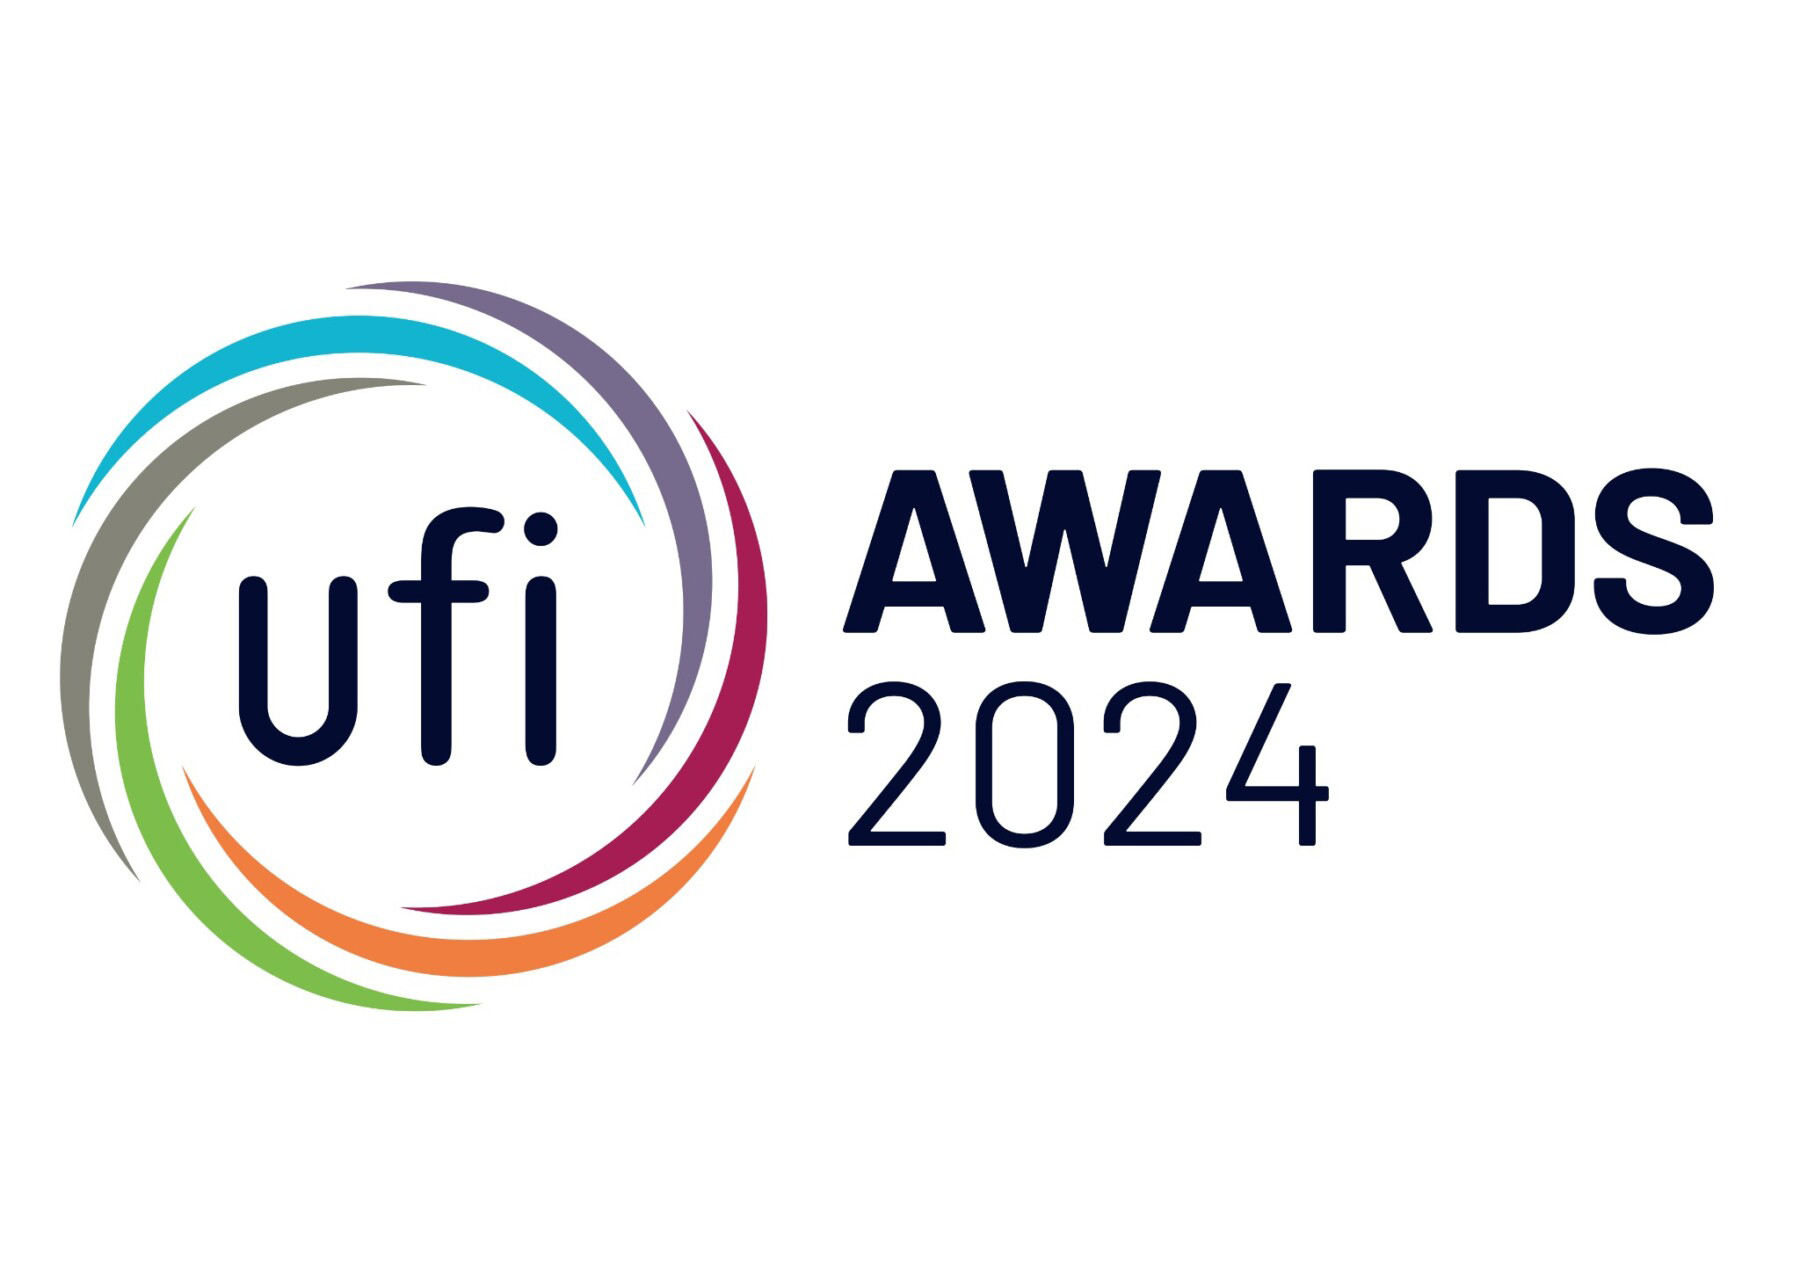 UFI launches its 2024 Awards